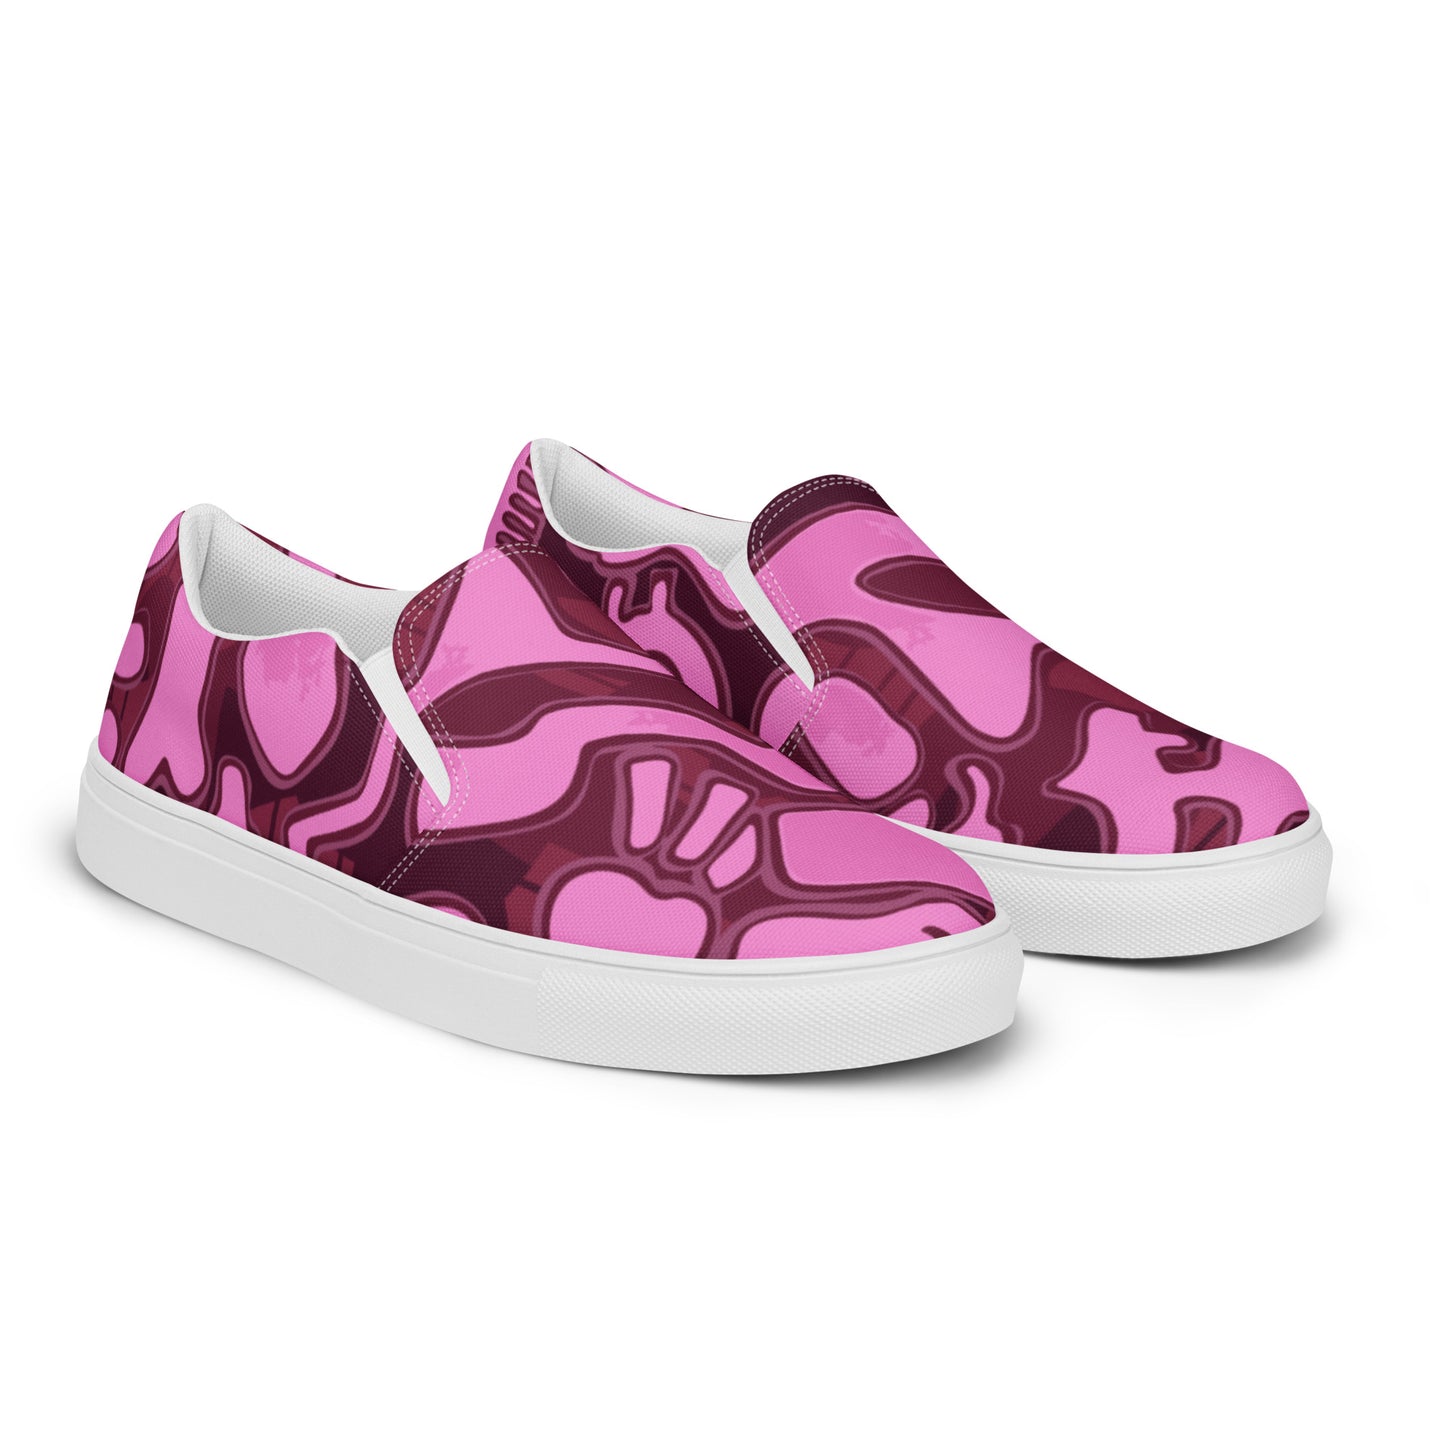 GRAPELY by DOLVING - Women’s slip-on canvas shoes